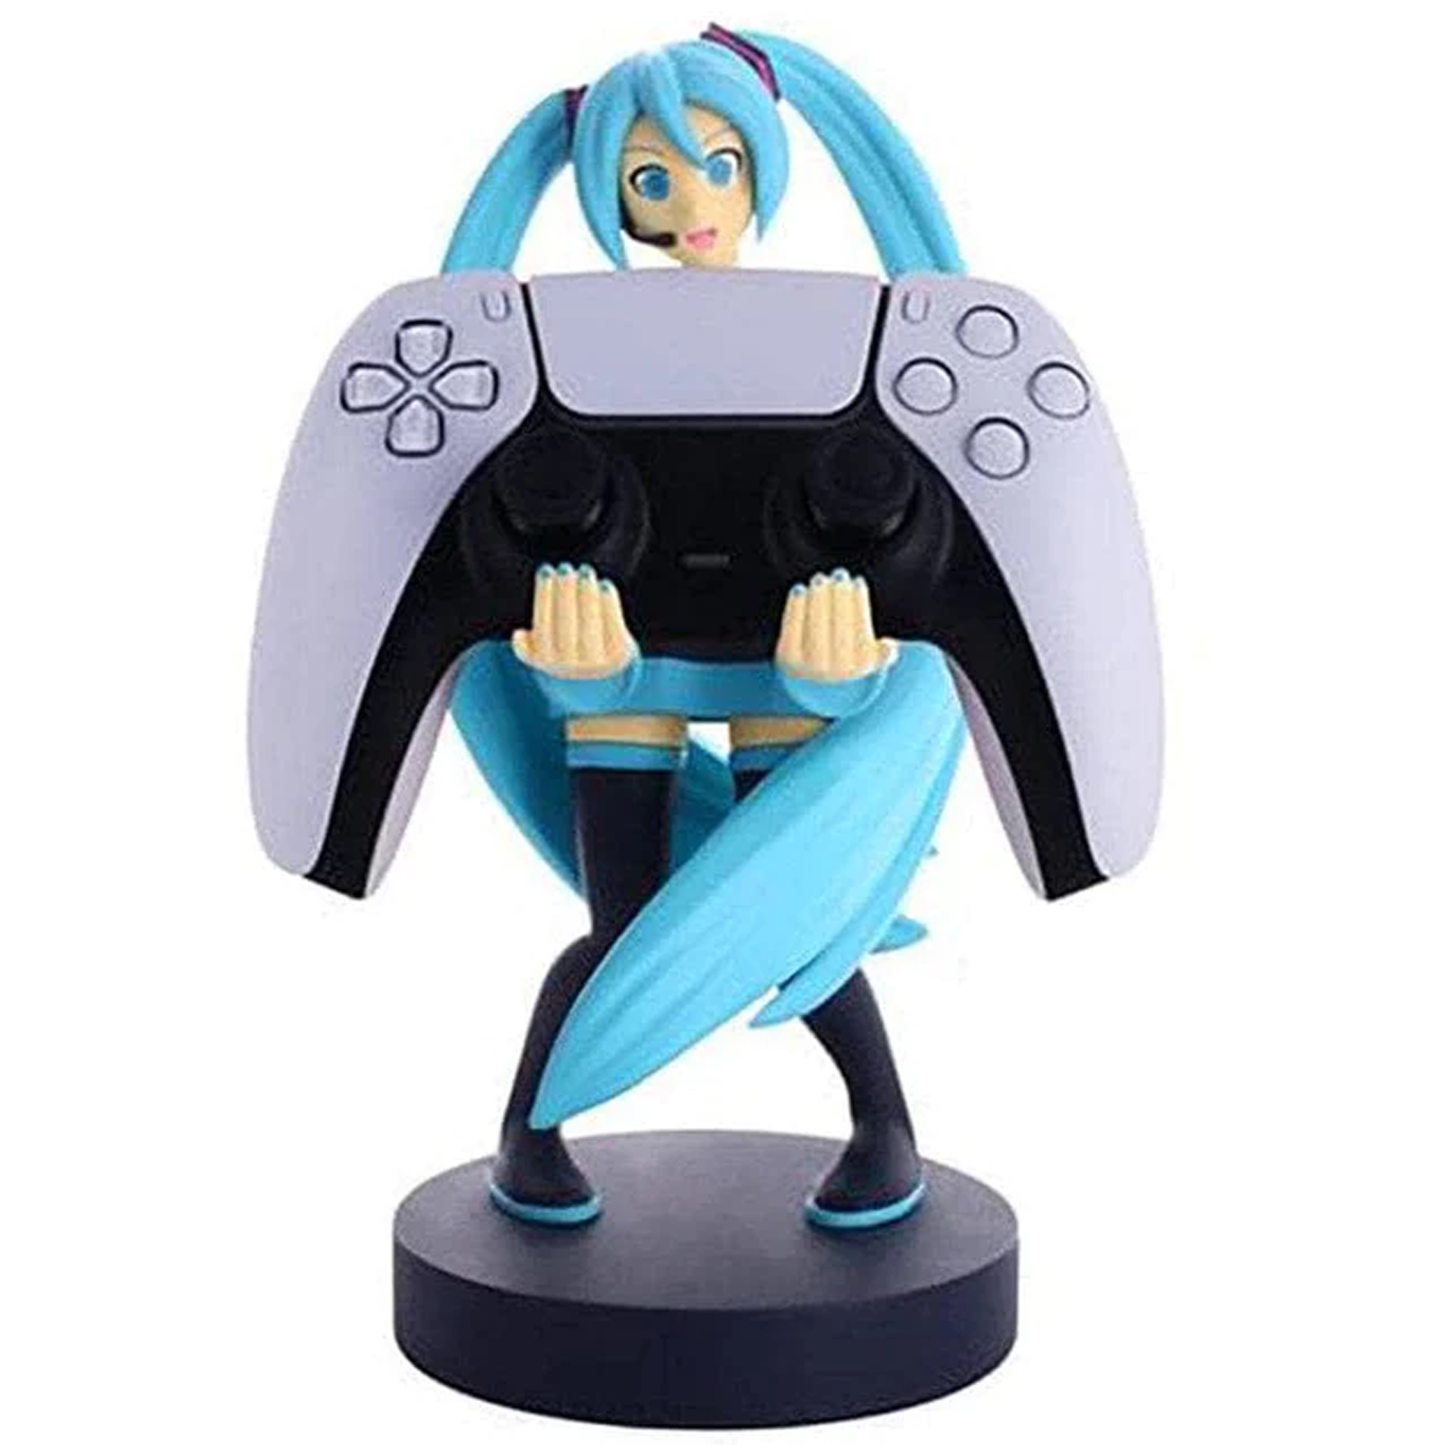 Hatsune Miku Cable Guys Phone and Controller Holder Holding a PlayStation Controller | Happy Piranha